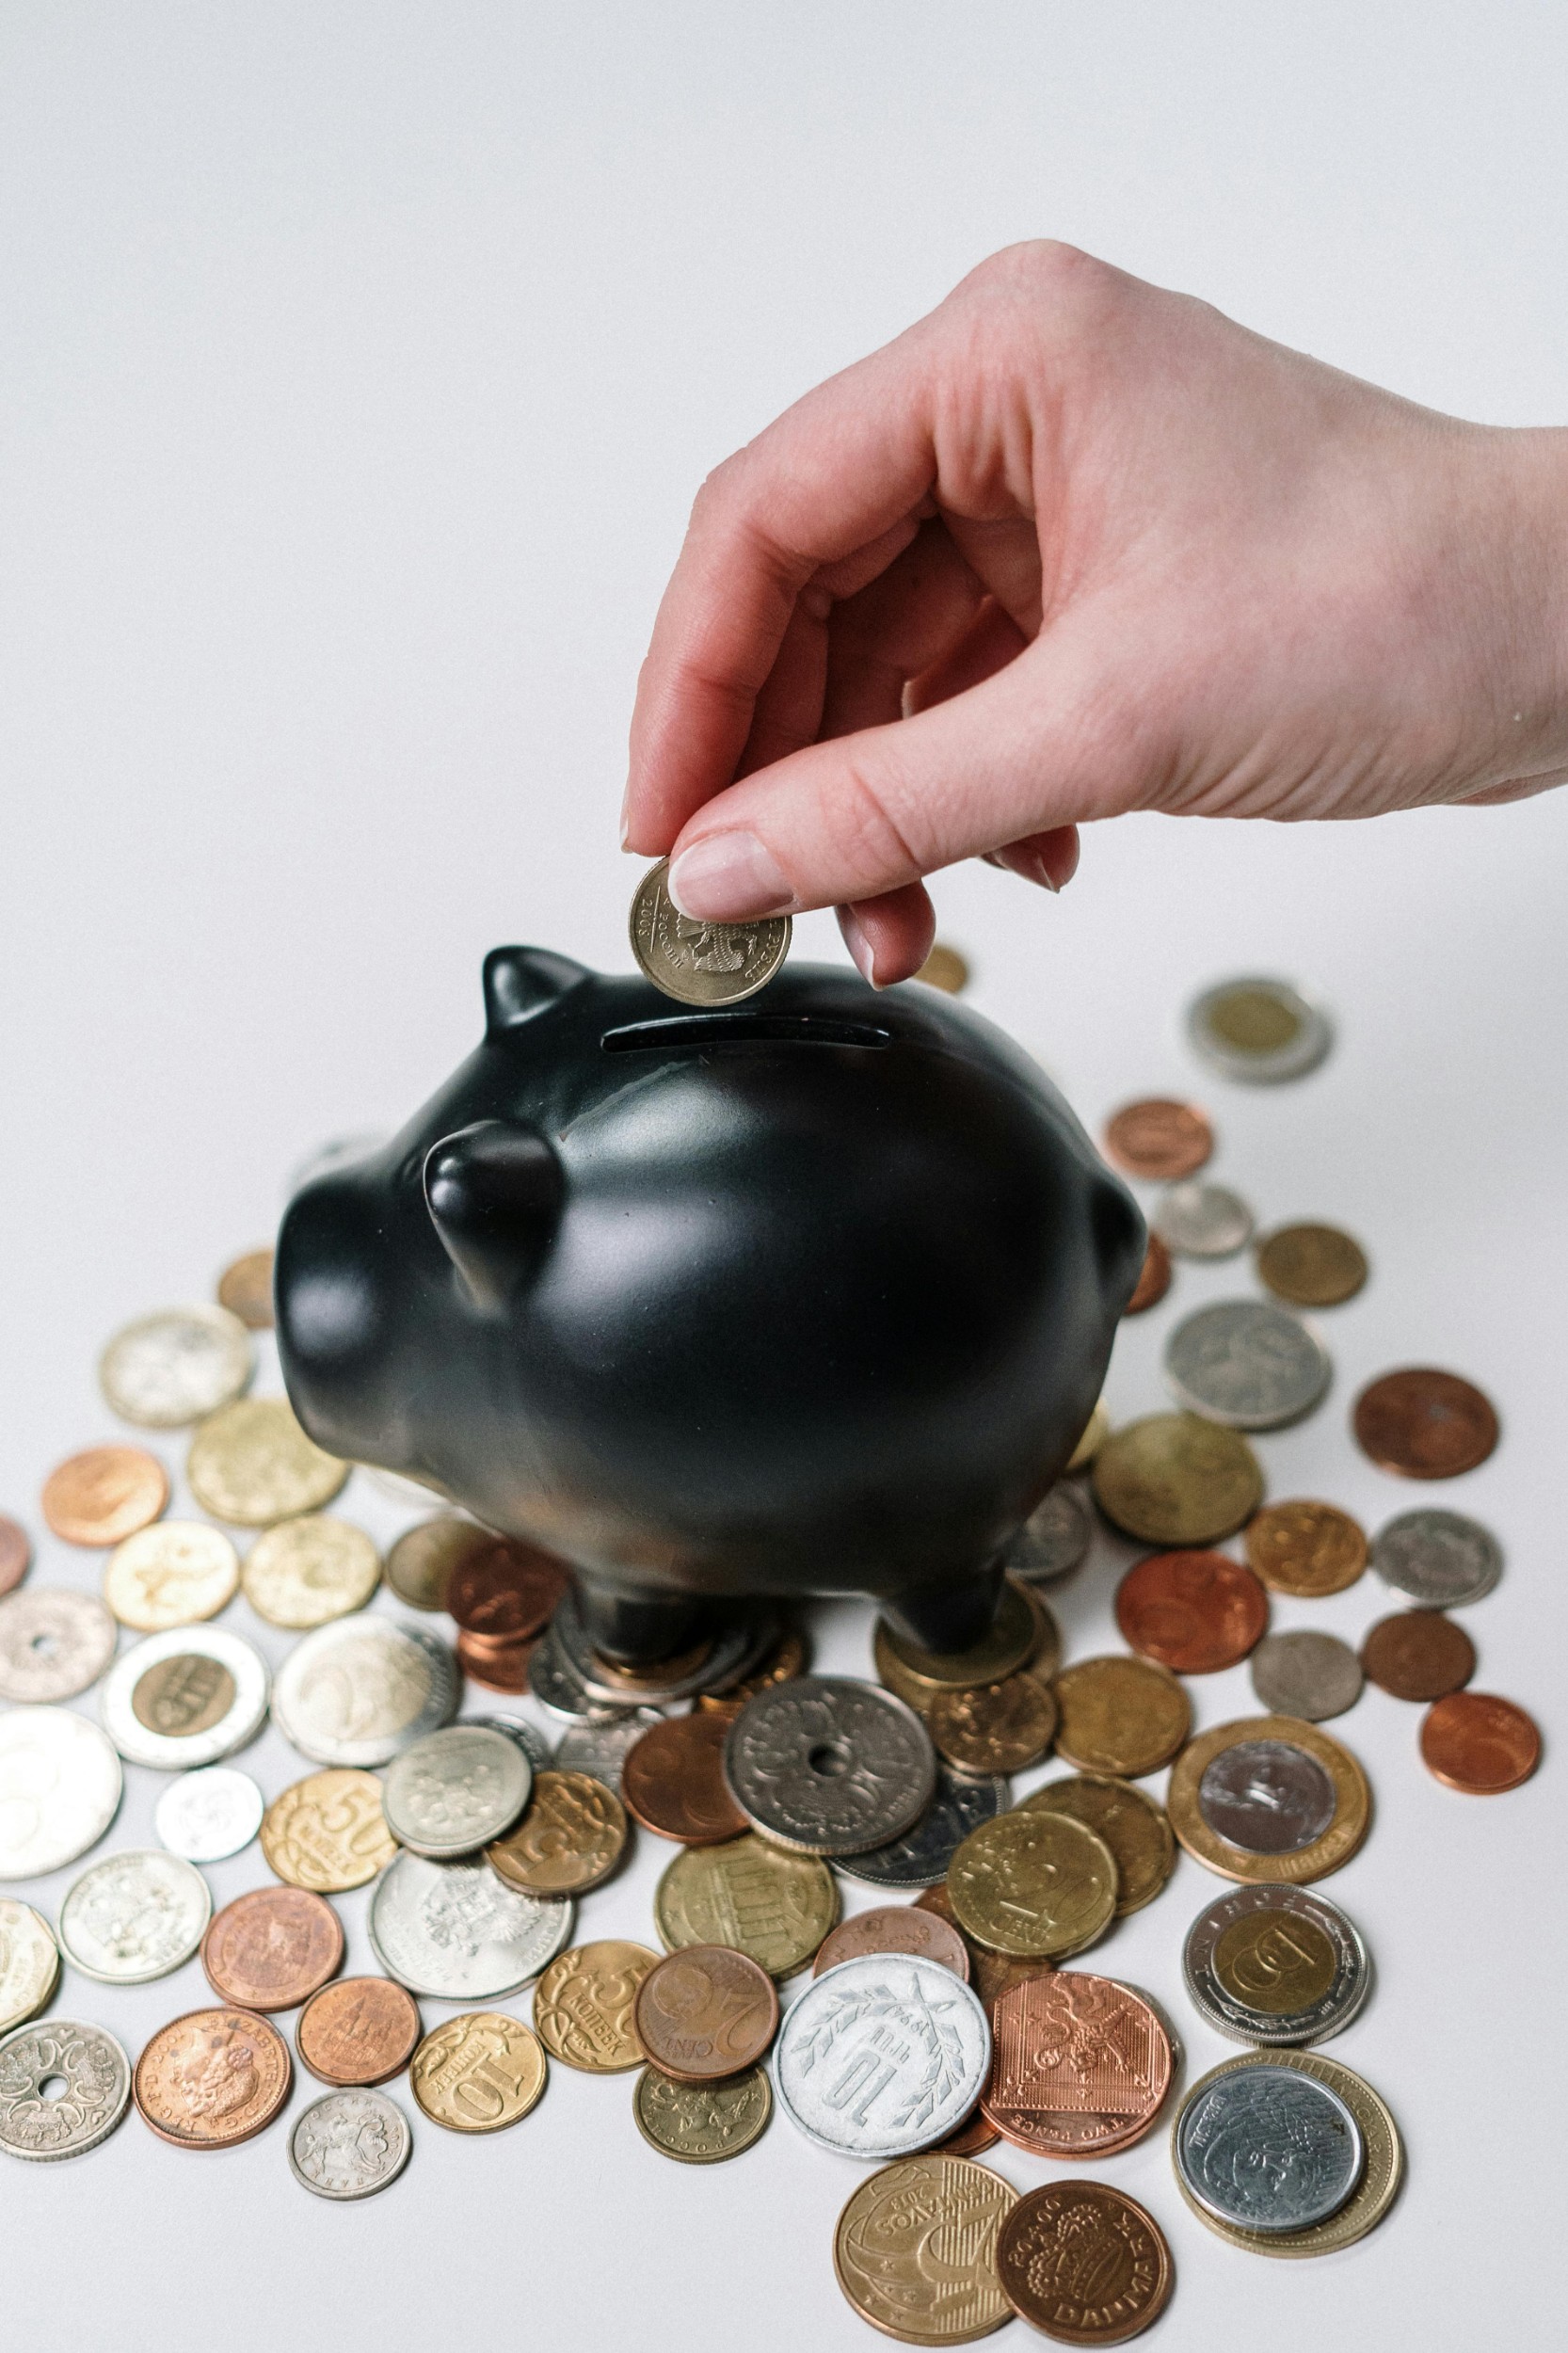 A hand putting money in a black piggy bank. There are coins scattered below the piggy bank.